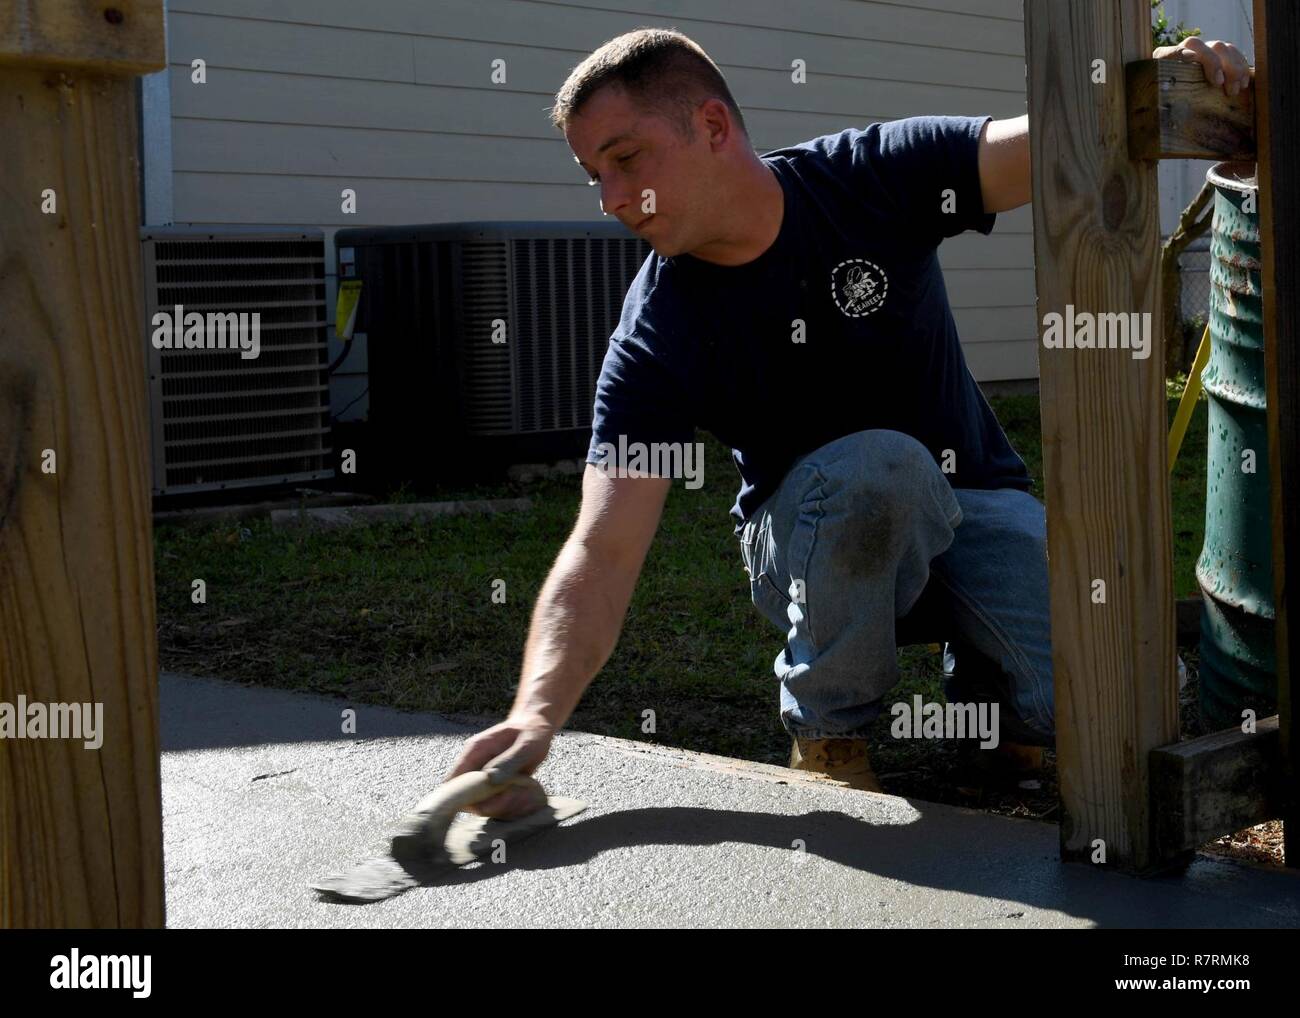 GULFPORT, Miss. (April 4, 2017) Chief Builder Andrew Brandmeier, with Navy Construction Group 2 Chief Petty Officer Association, finishes a handicap ramp poured during a community outreach event held at the South Mississippi Mental Health Association in Gulf Port Miss. Gulfport/Biloxi is one of select regions to host a 2017 Navy Week, a week dedicated to raise U.S. Navy awareness in through local outreach, community service and exhibitions. Stock Photo